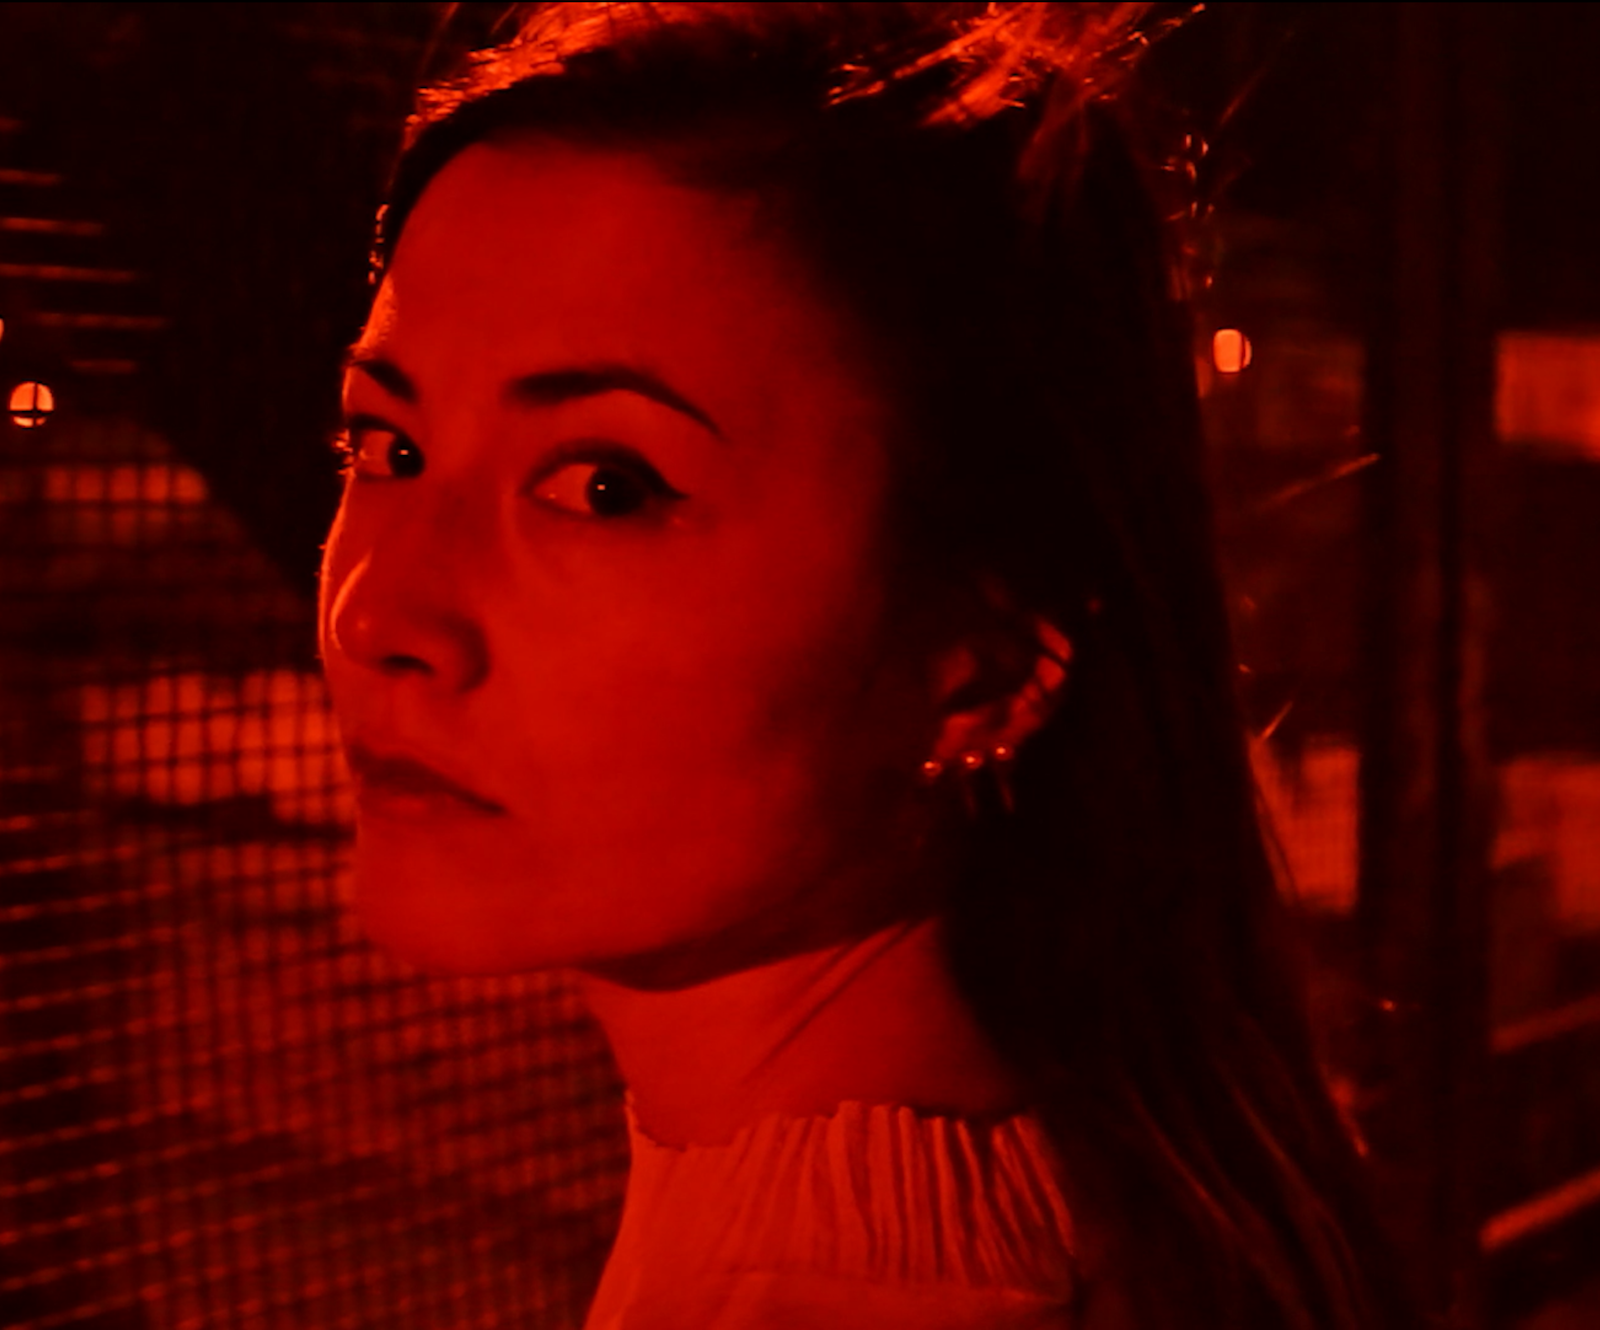 Watch a hypnotic film noir video by Chinese-Serbian artist Realma